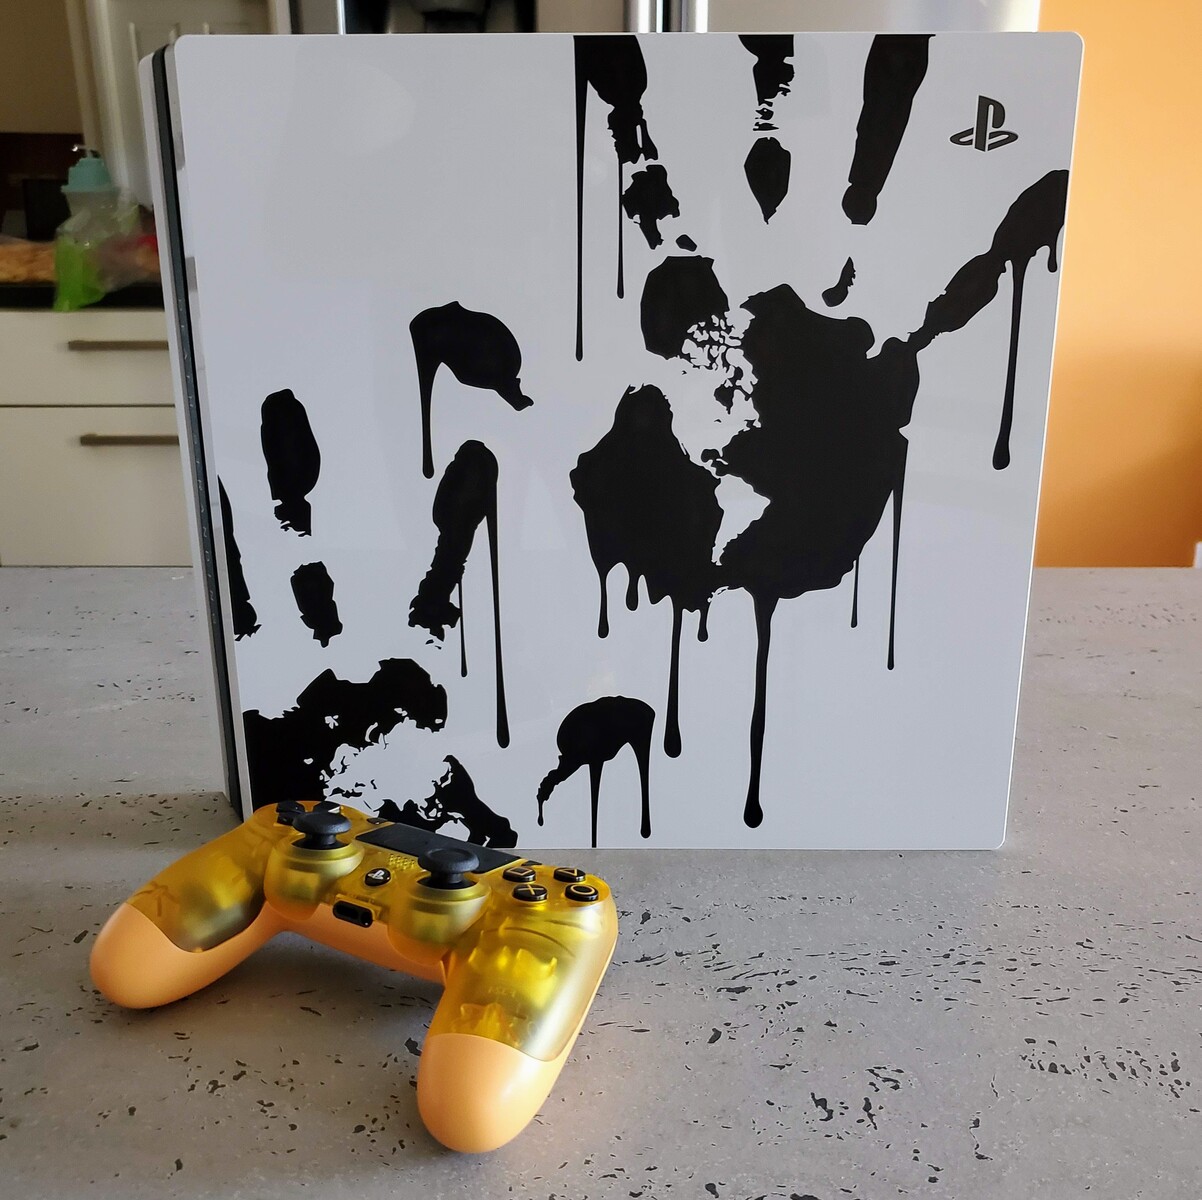 ps4 pro death stranding limited edition amazon